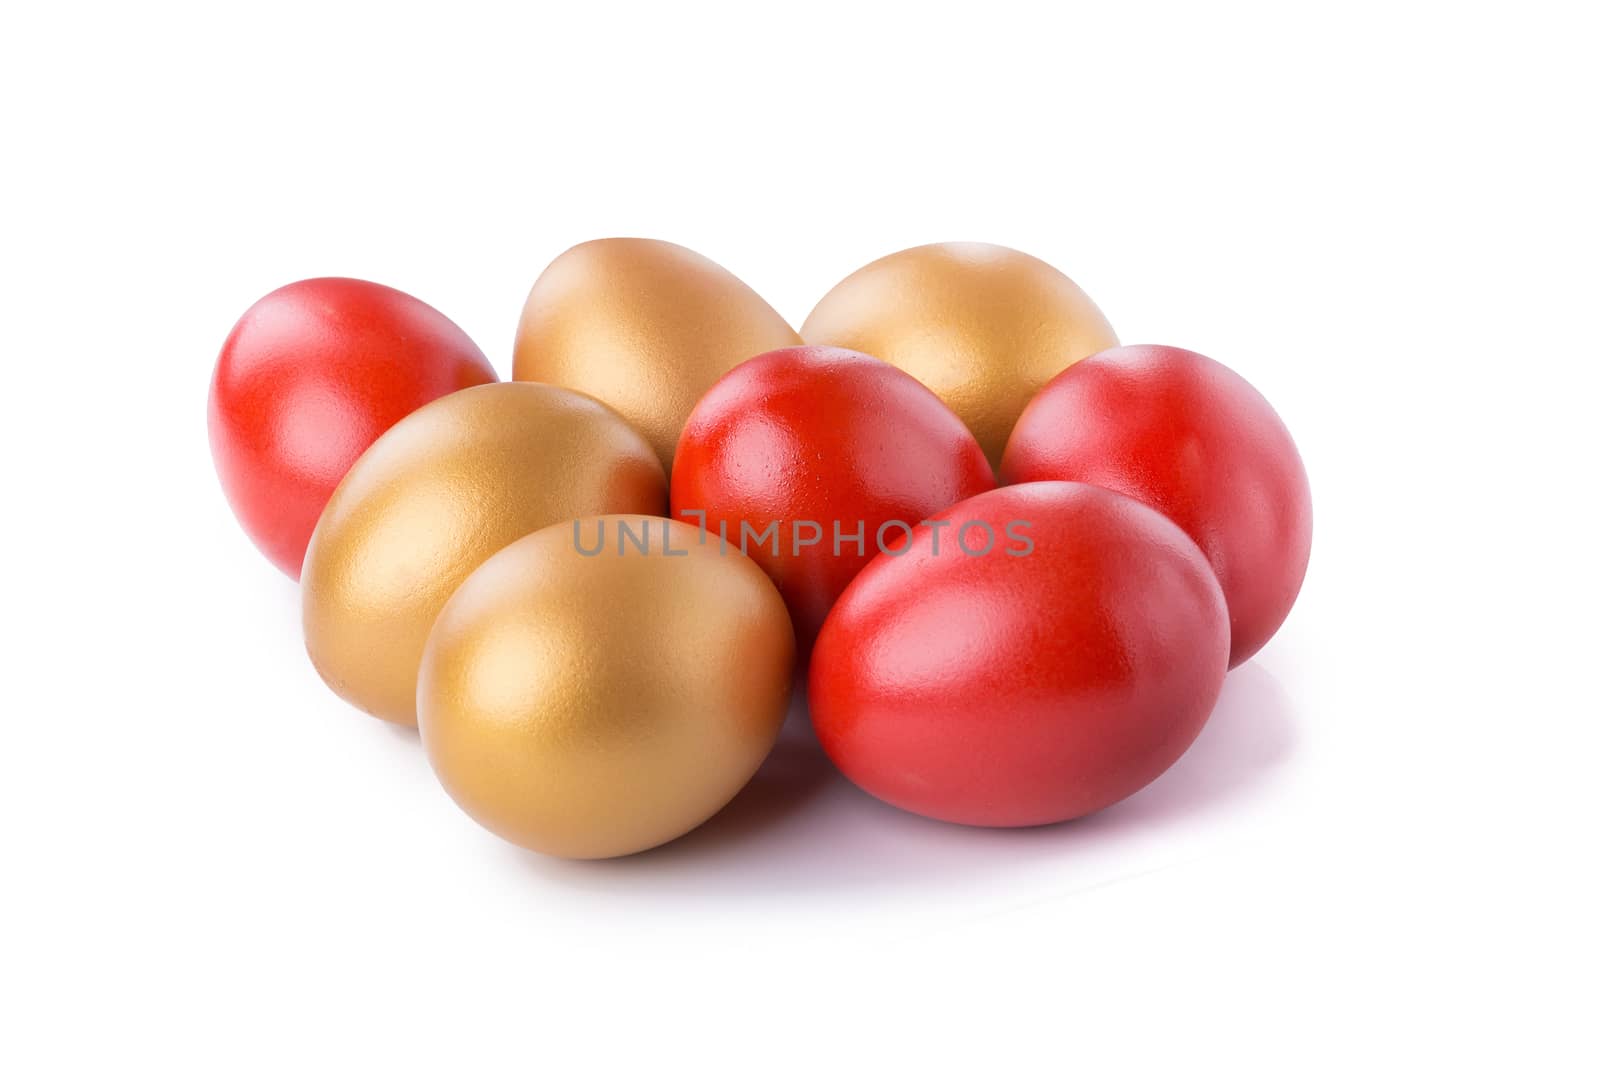 Golden Egg and Red Egg isolated on a white background.